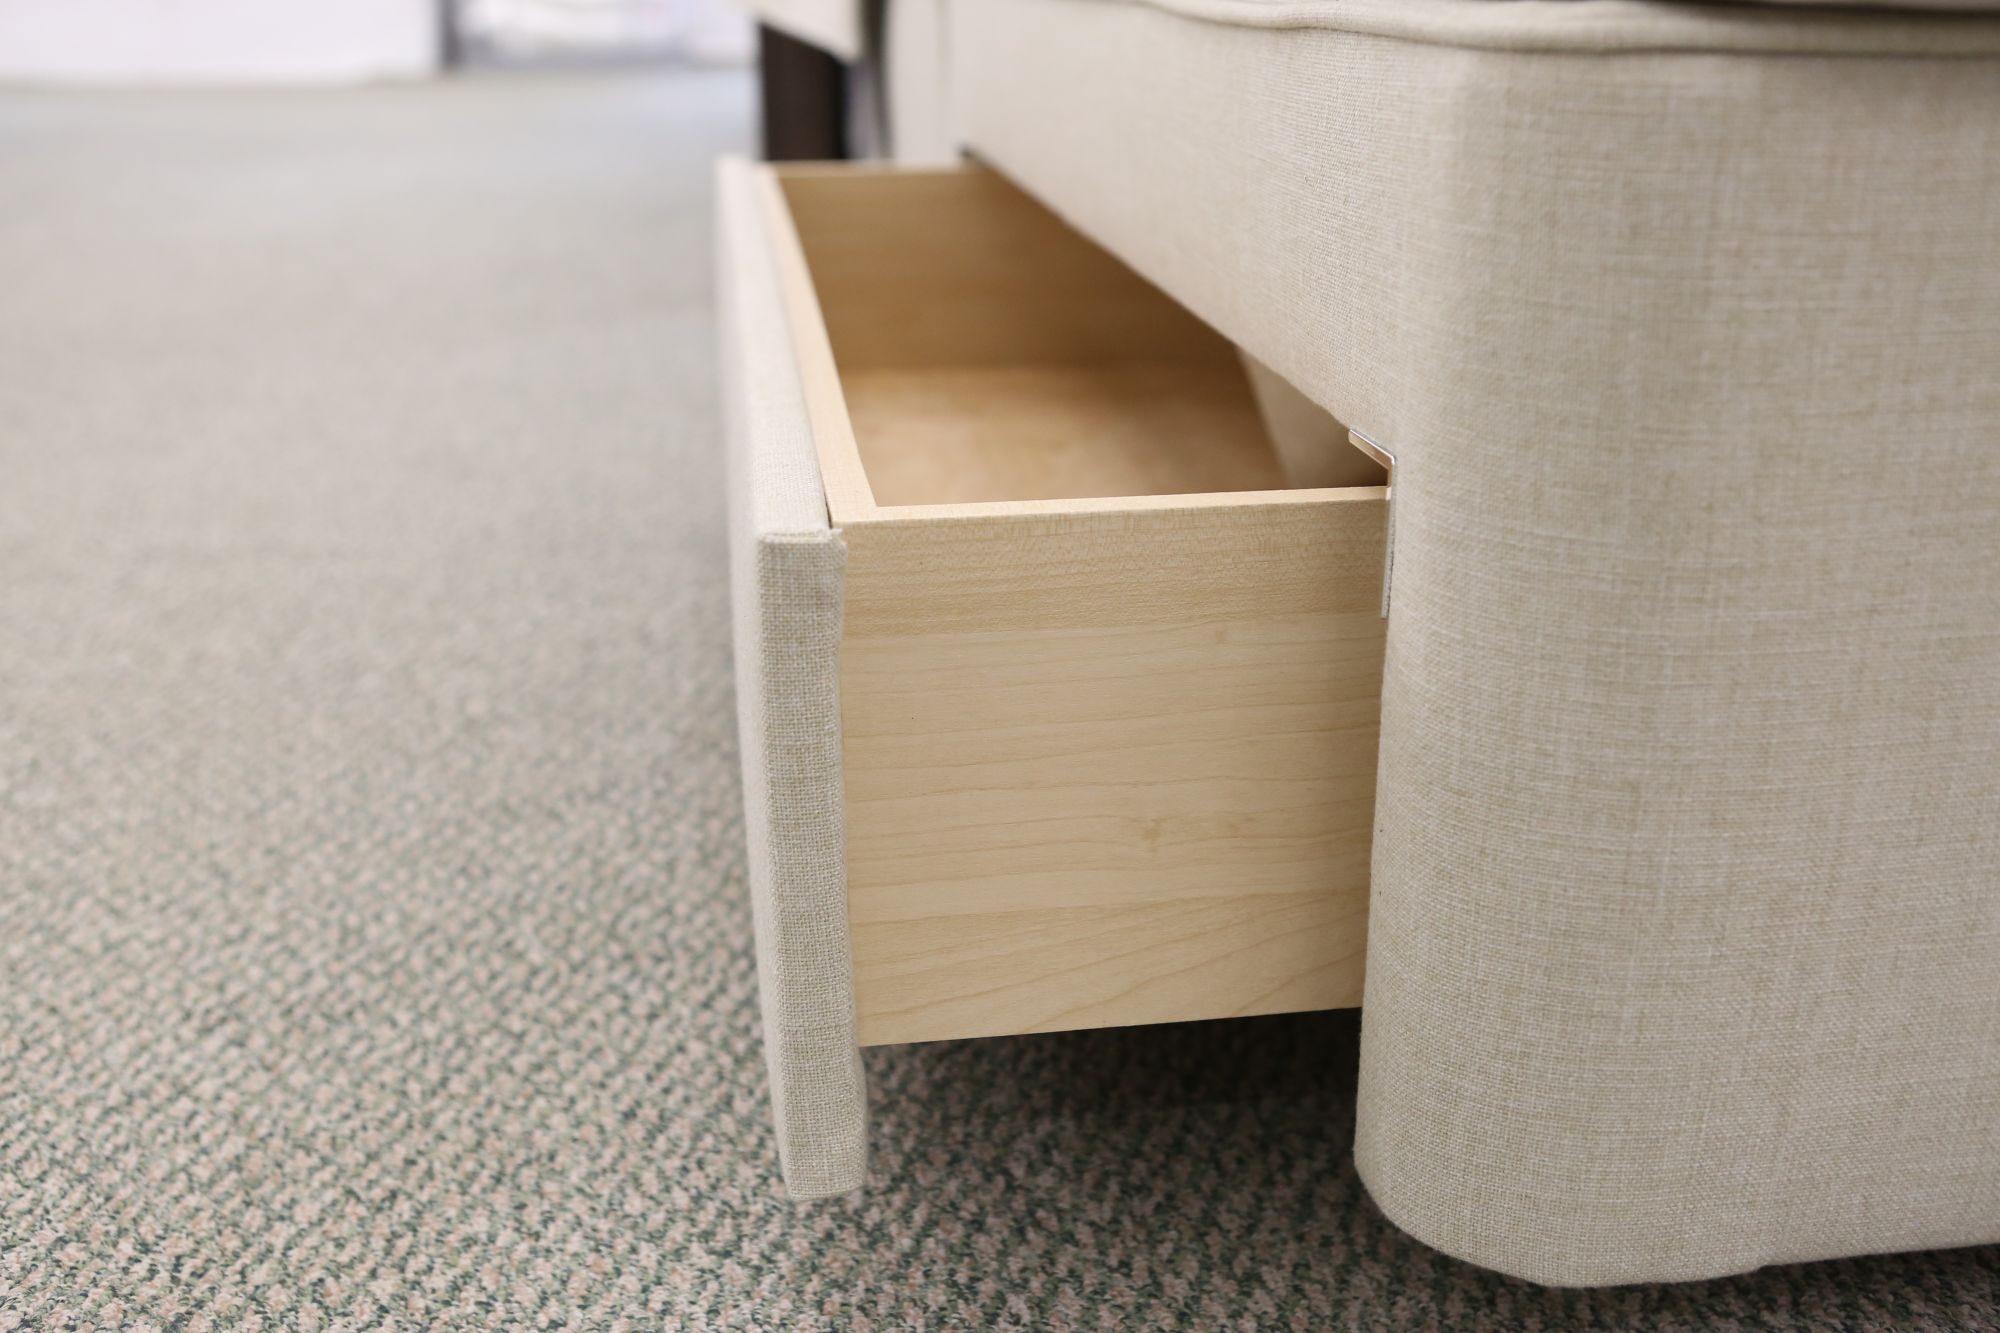 Divans are an excellent storage solution and choose from a huge range of upholstery options.